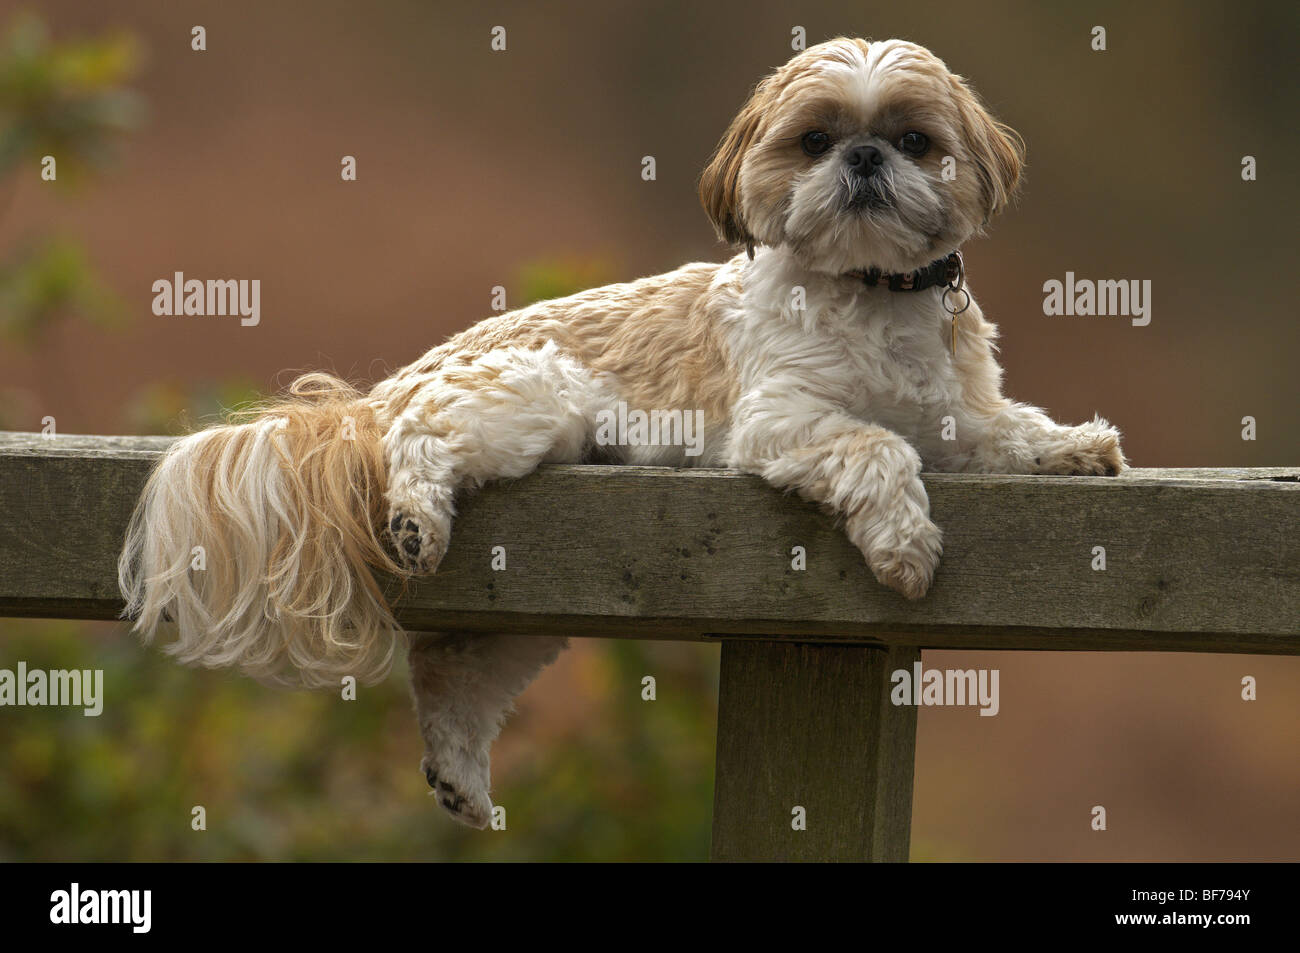 FEMALE SHIH TZU CANIS LUPUS FAMILIARIS DOMESTIC DOG LAYING ON A BENCH OUTDOORS Stock Photo